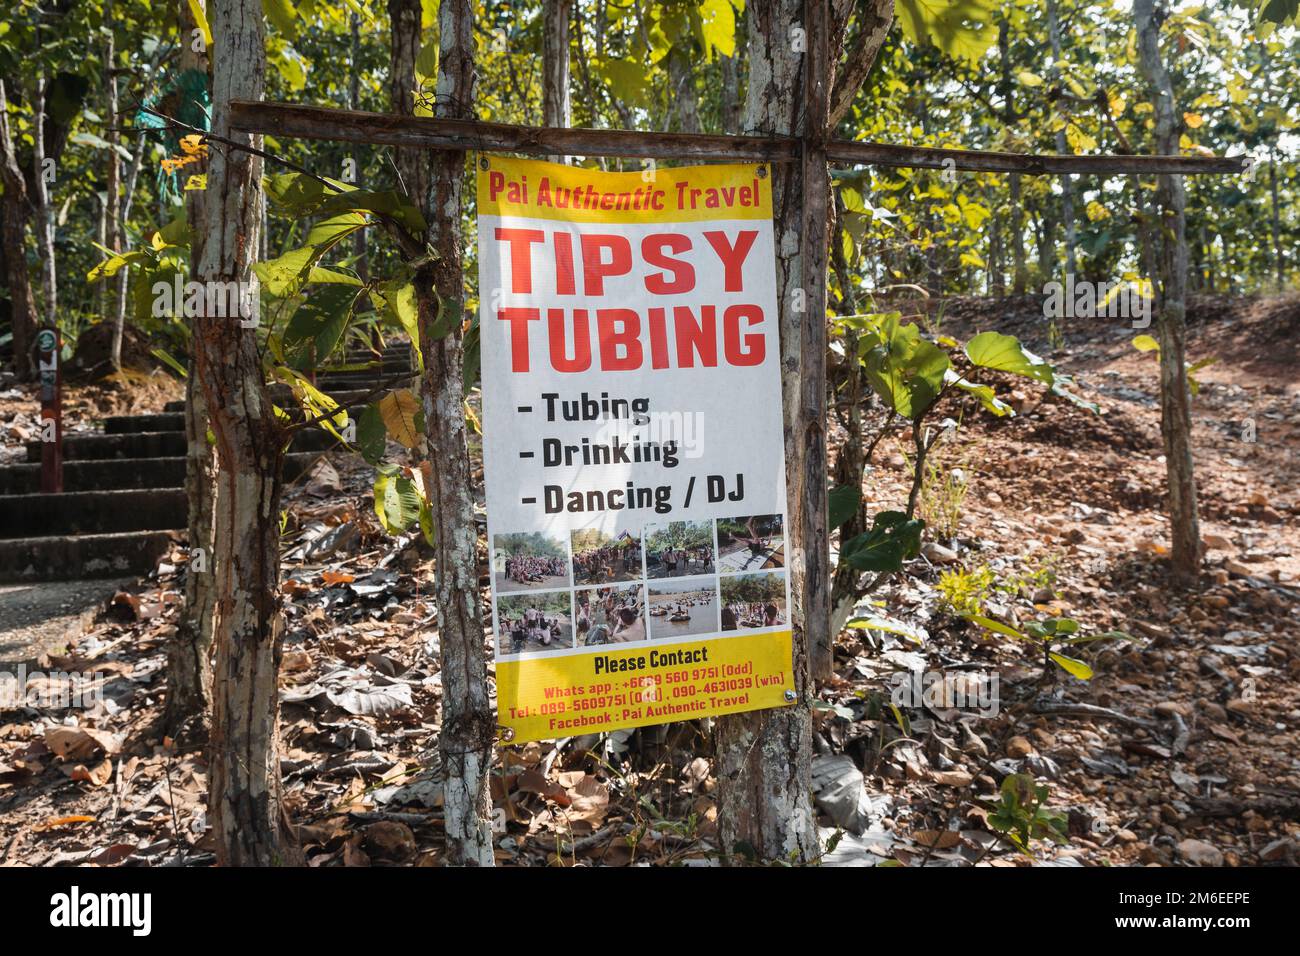 Pai, Thailand. November 20, 2022. Tipsy tubing ad in the forest of Pai, Thailand Stock Photo